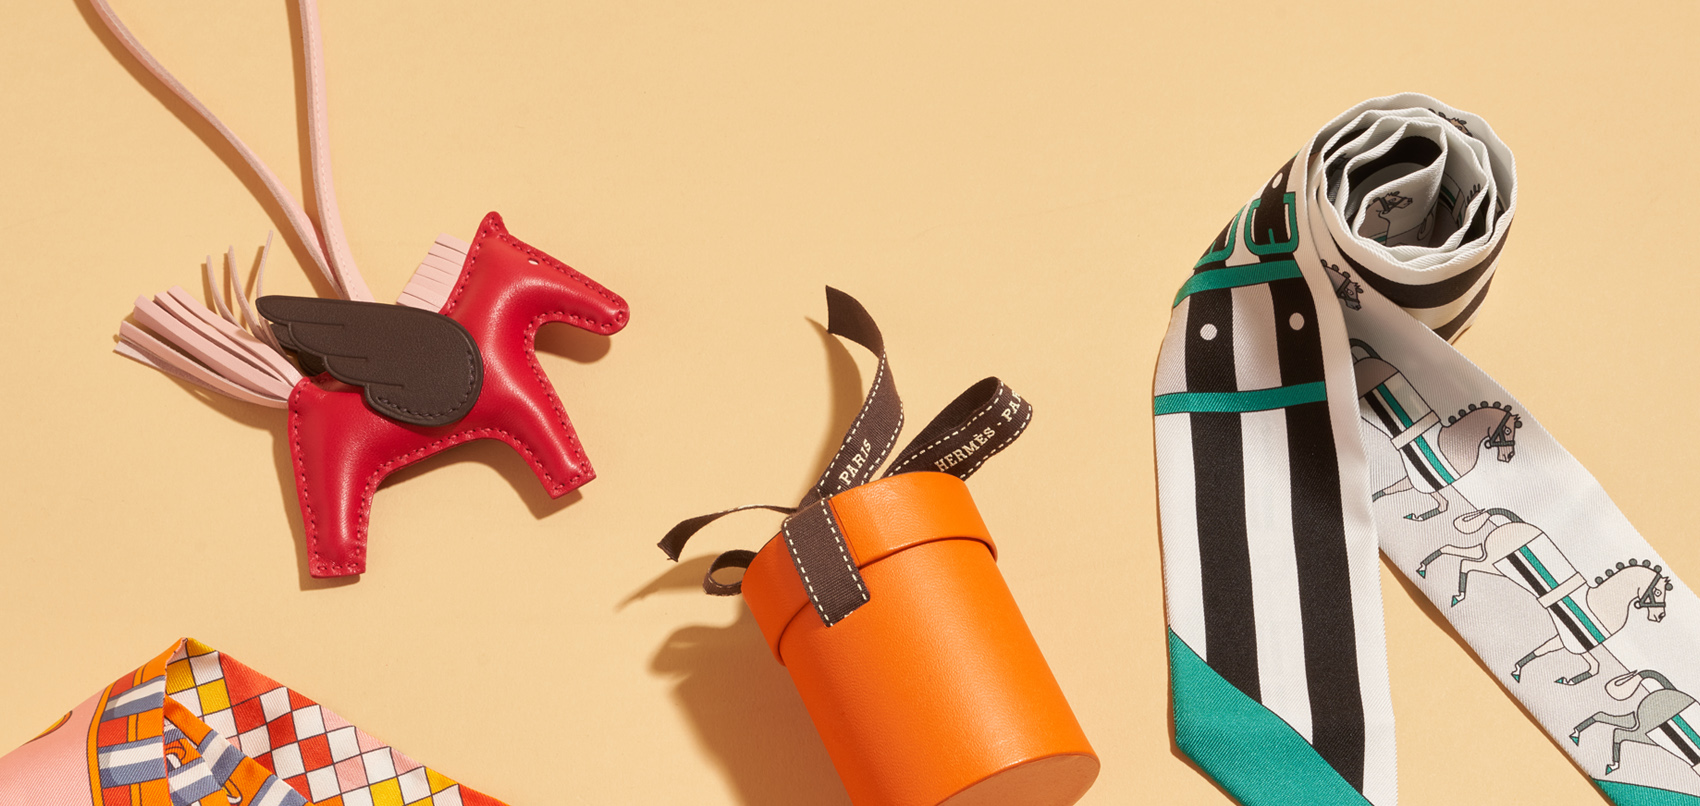 An Essential Guide to Hermès Handbag Charms and Accessories